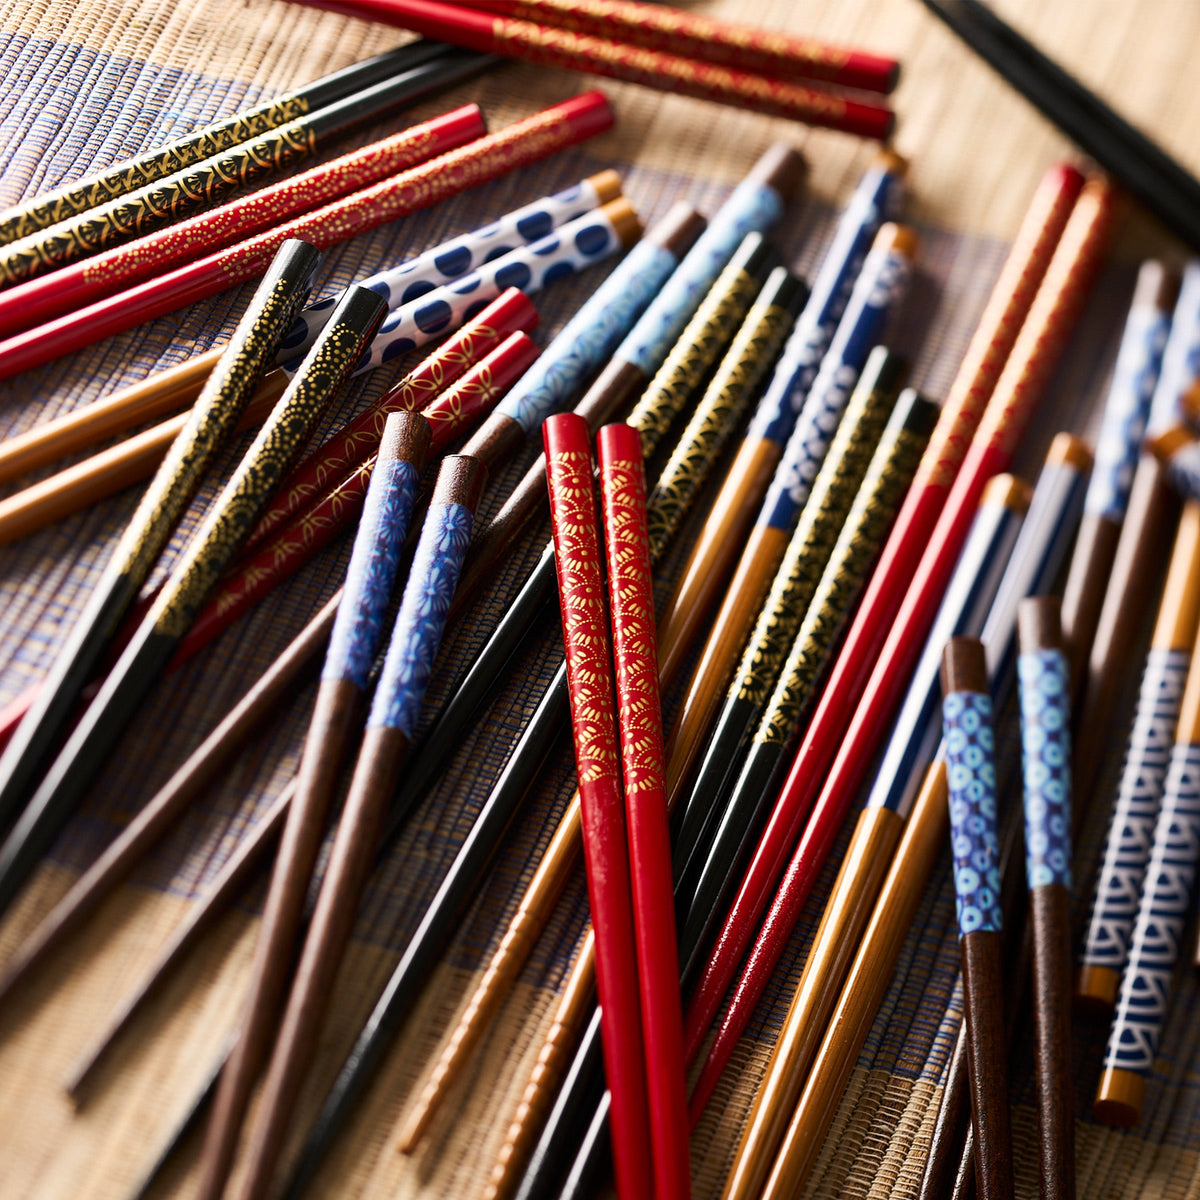 A group of Tokyo Chopsticks from Miya, Inc., with intricate gold patterns laying on a table.